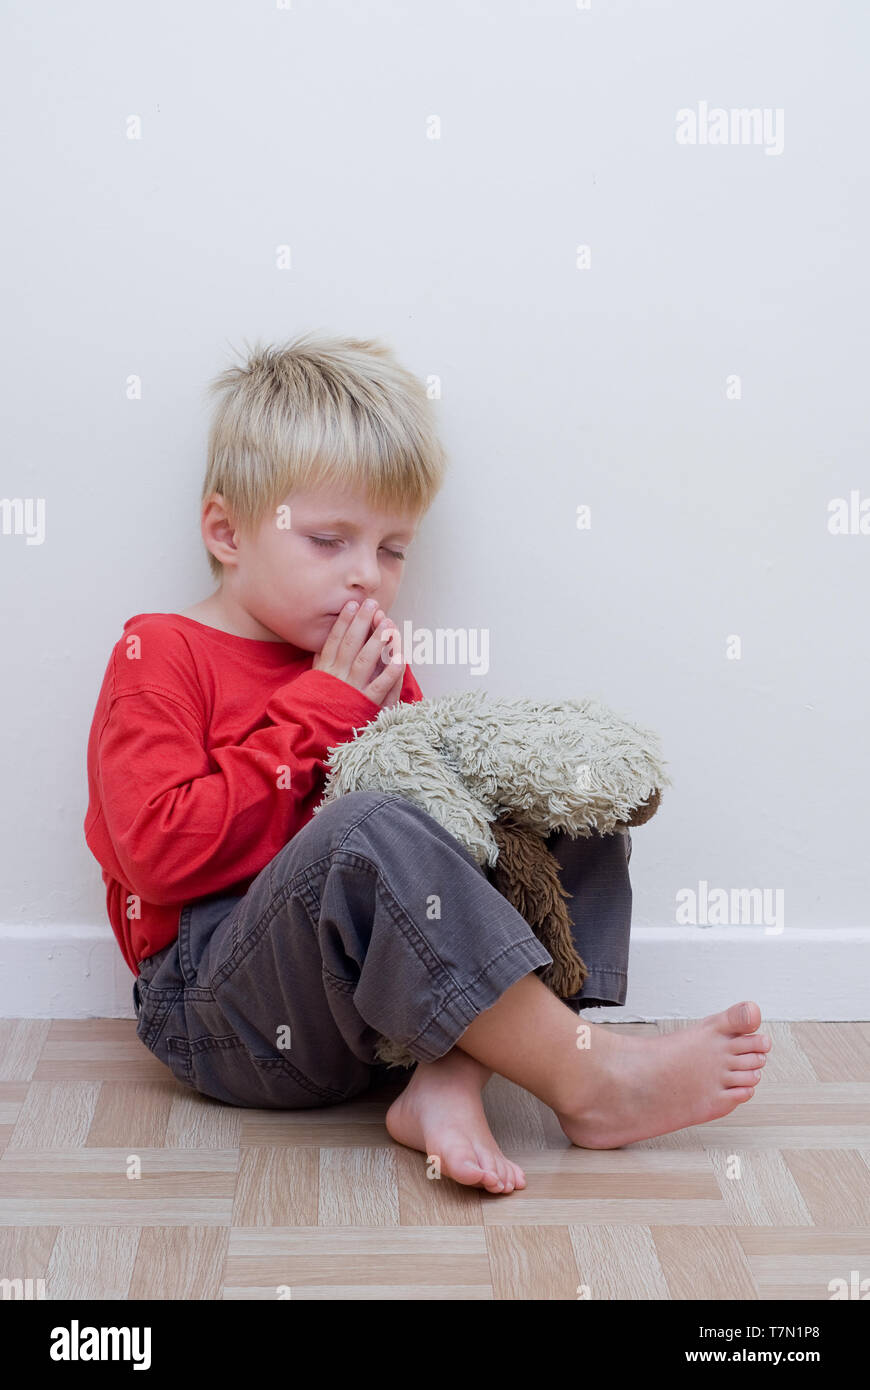 Little boy sitting on the floor and praying with his toy dog next to him. Stock Photo